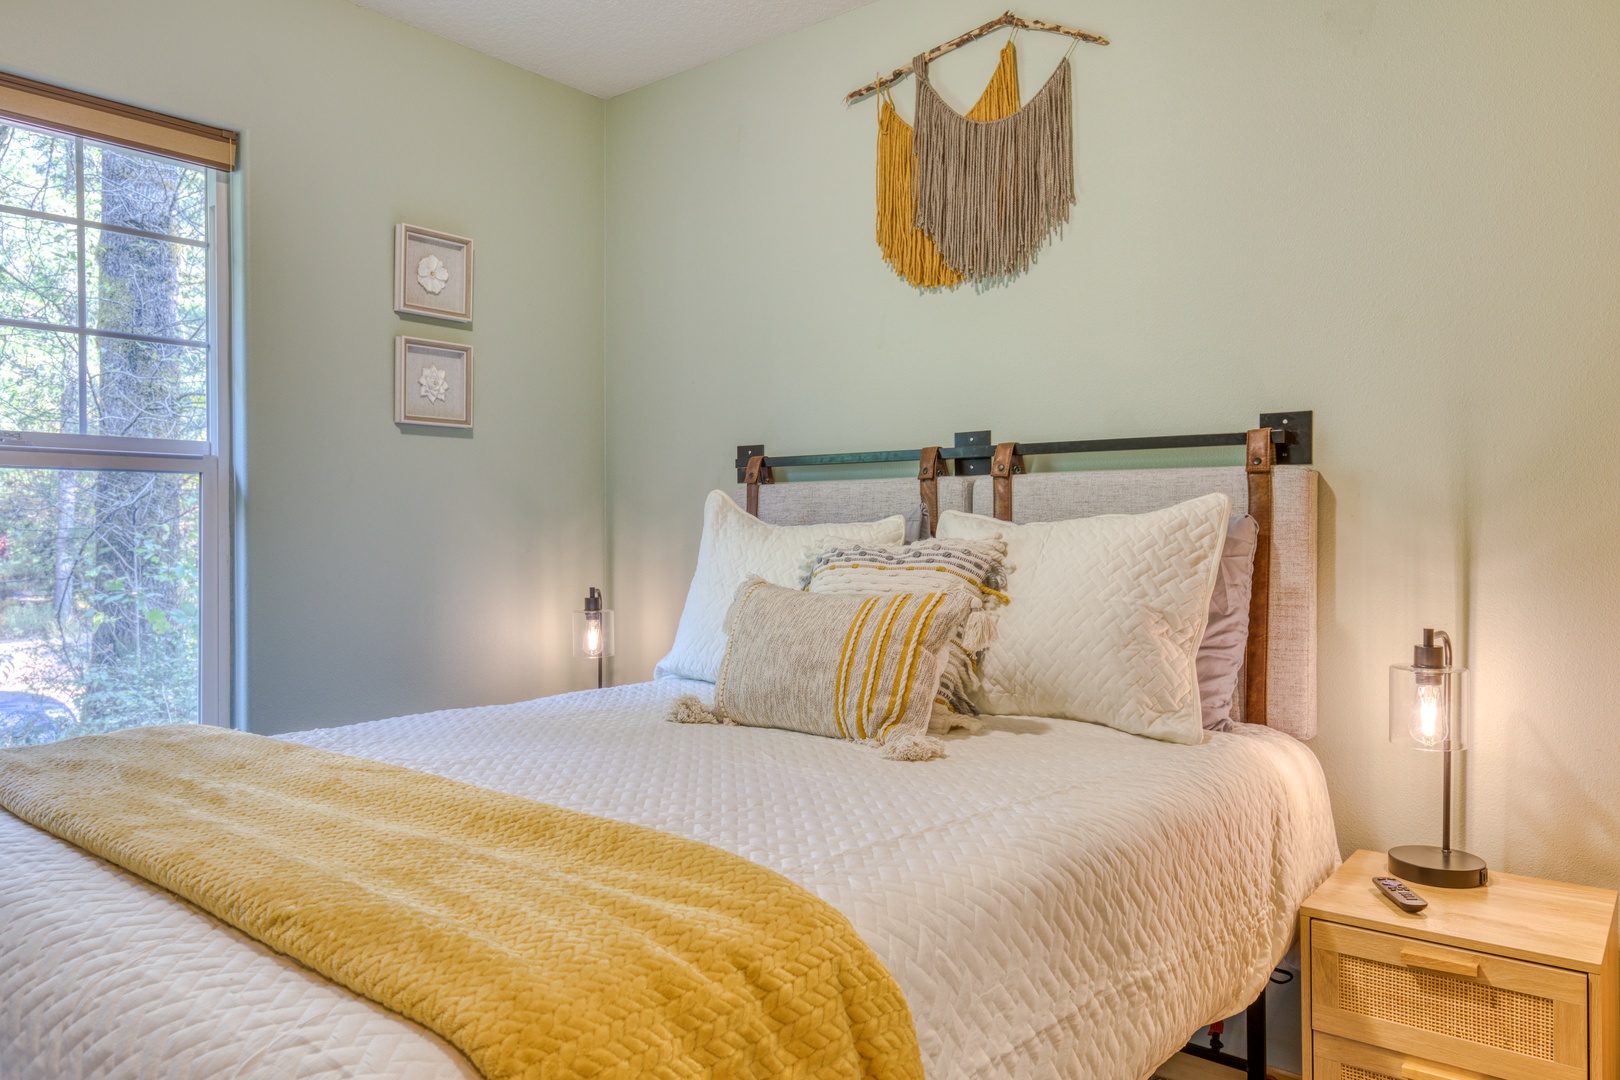 Brightwood Vacation Rentals, Riverside Retreat - The warm touches in this bedroom really make it feel like home